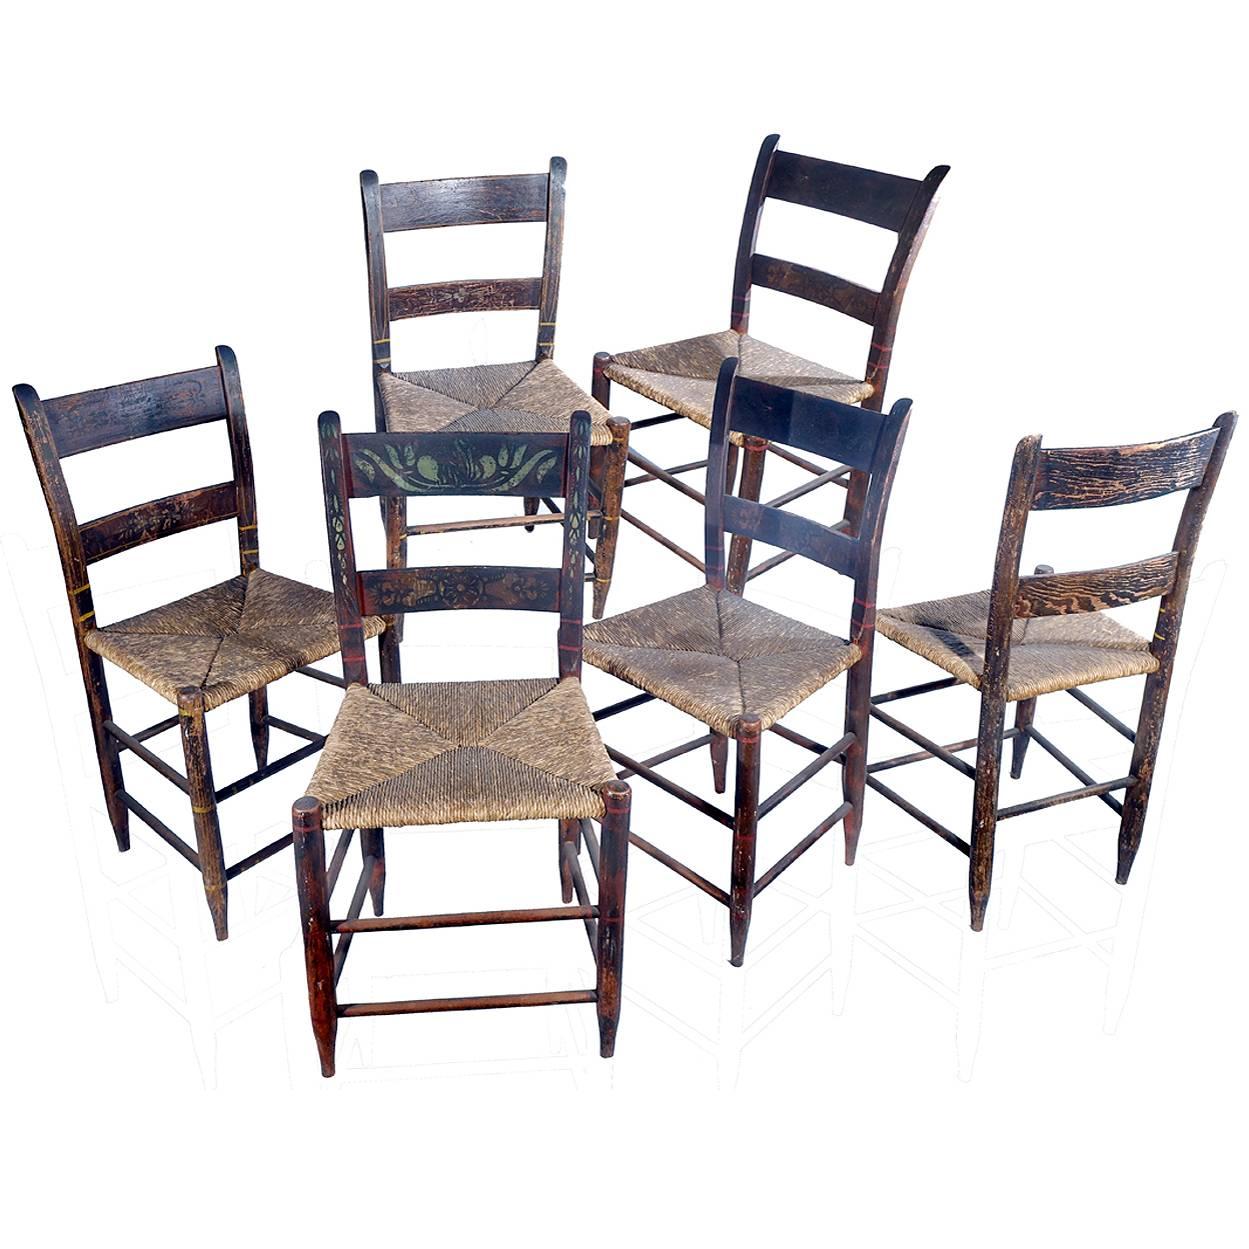 Set of Six Hand-Painted Rush Chairs